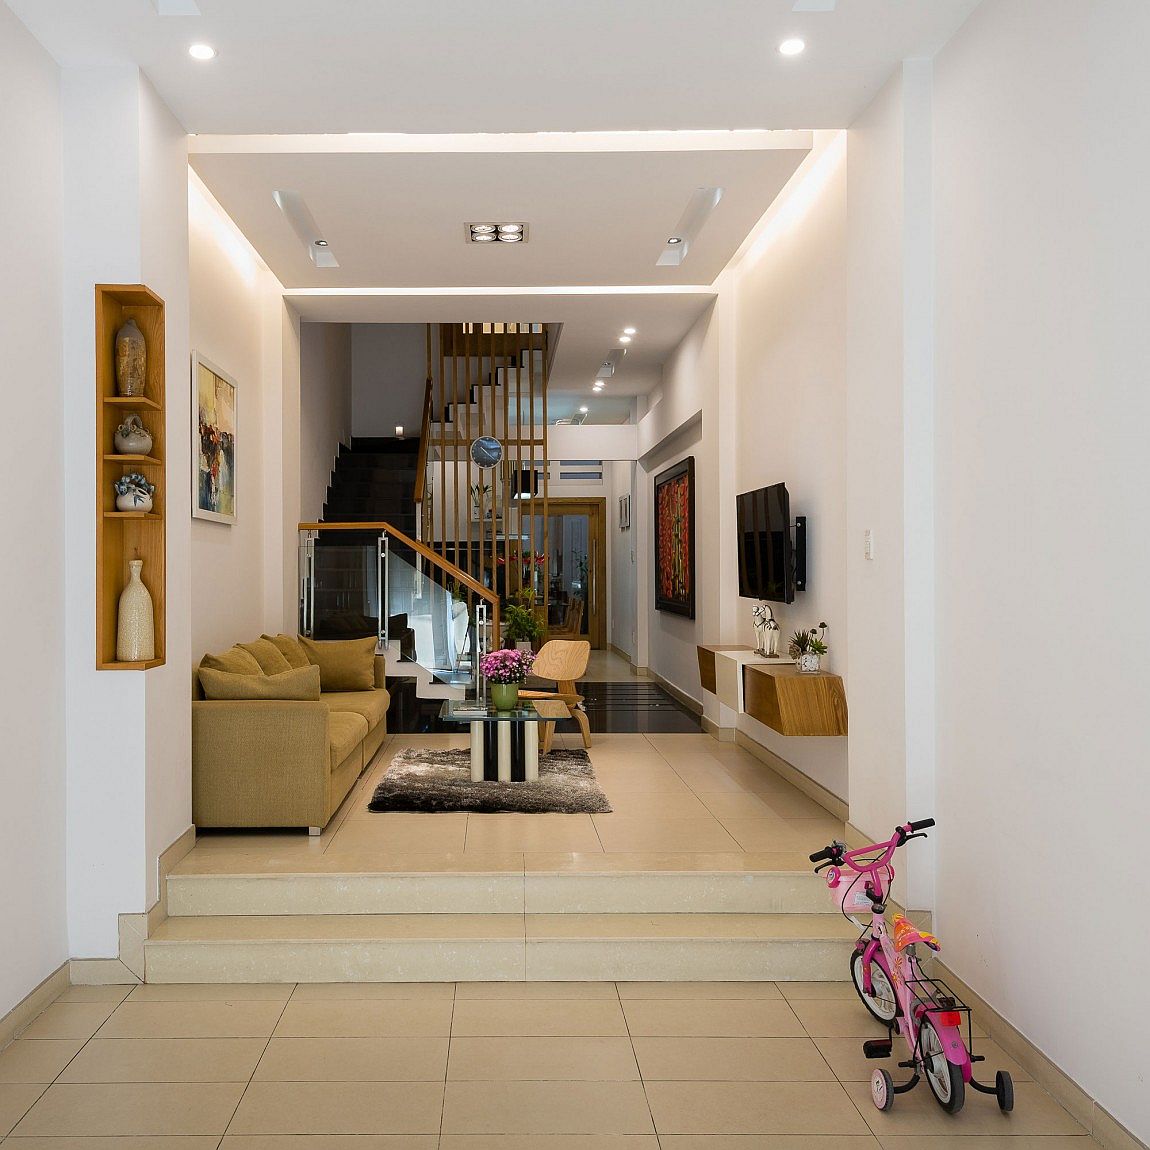 Lower level living area of the modern home in Vietnam